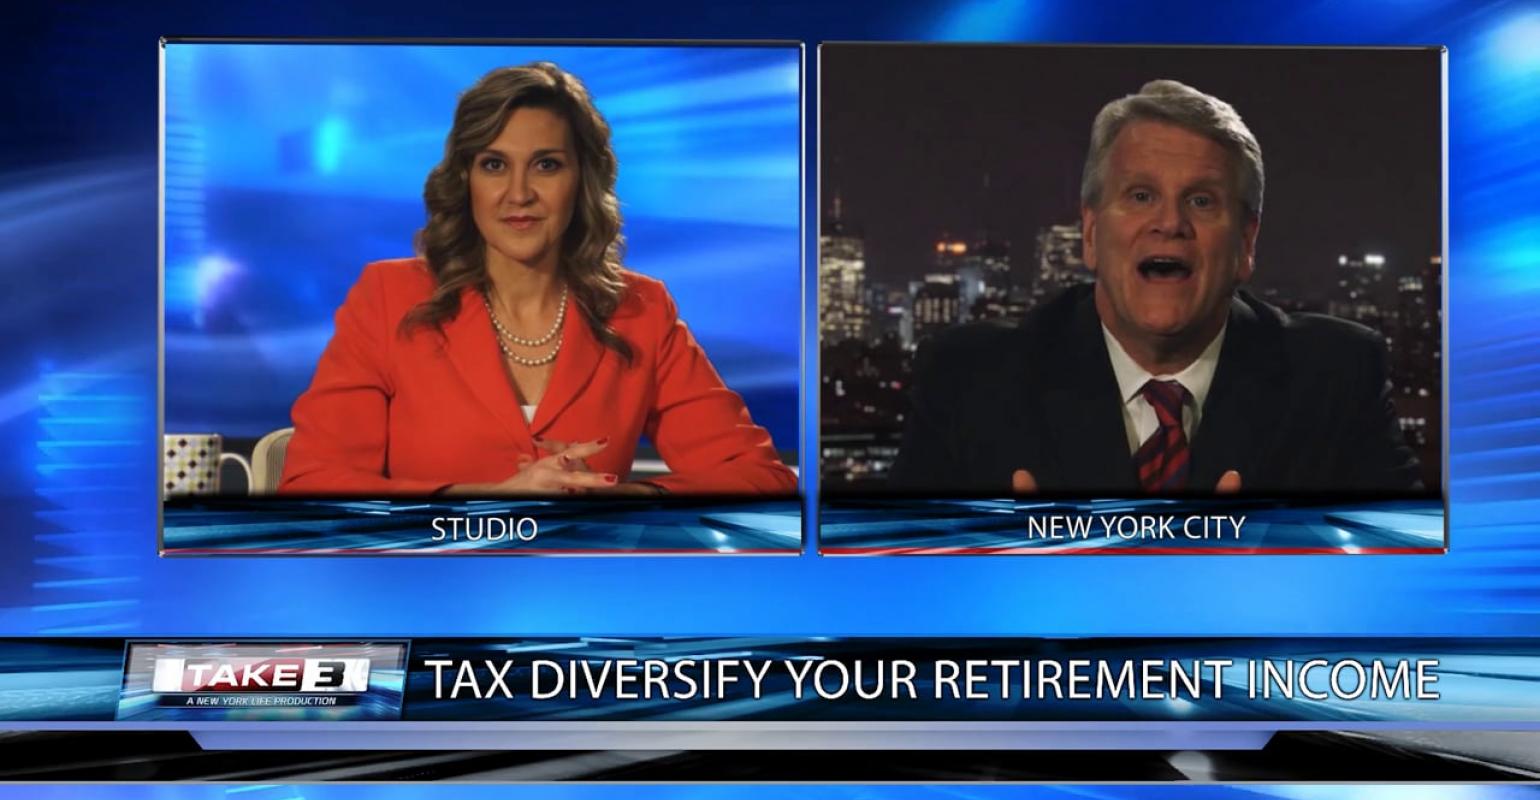 Tax Diversify Your Retirement Income